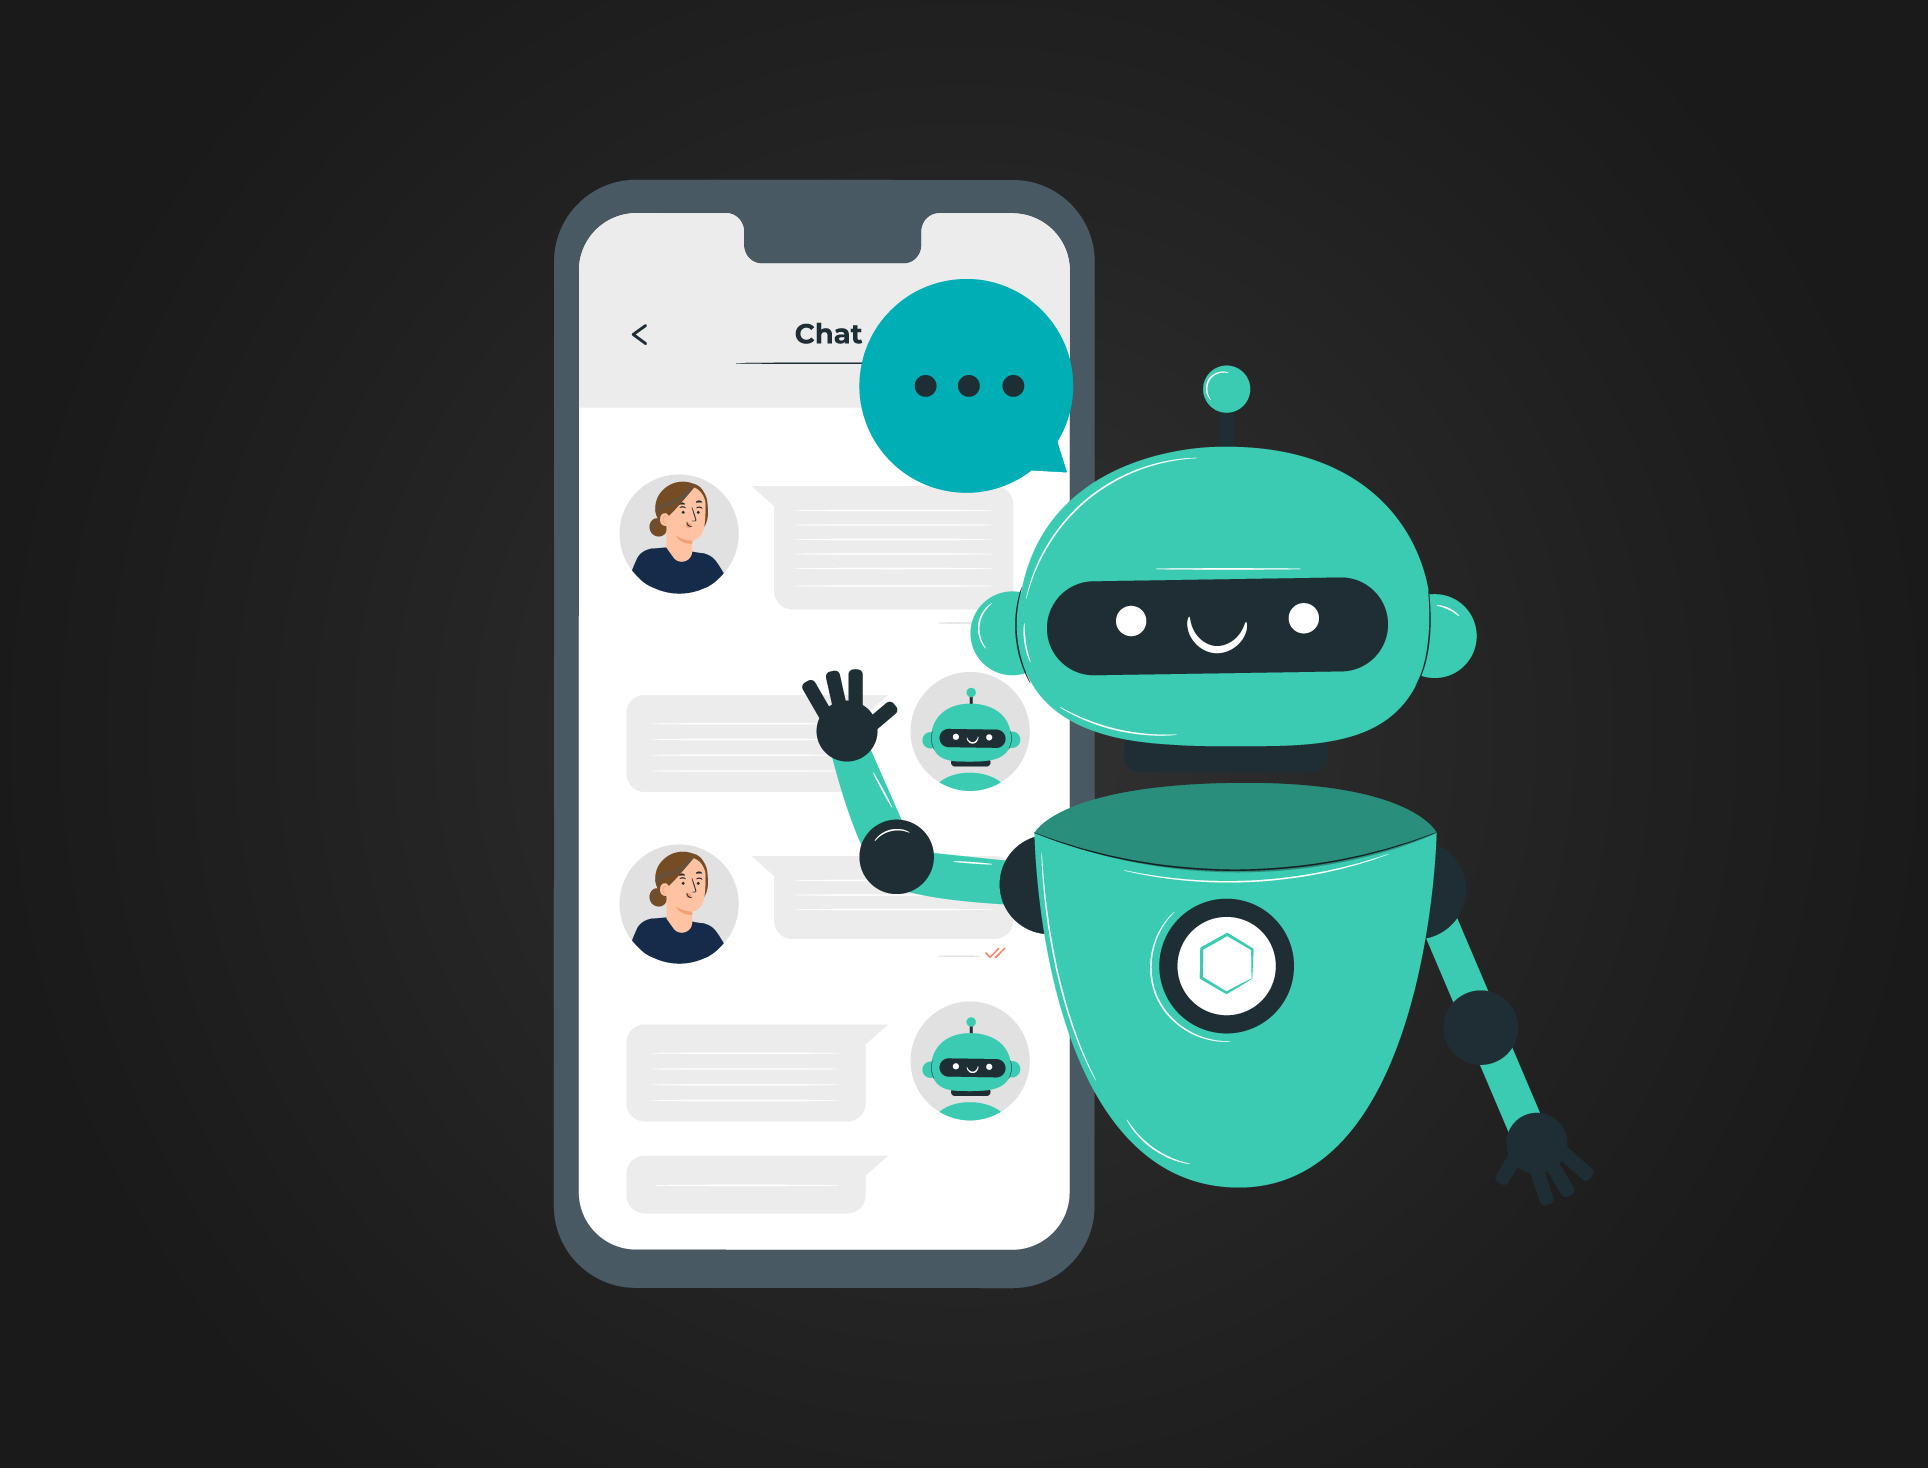 rise of the chatbot